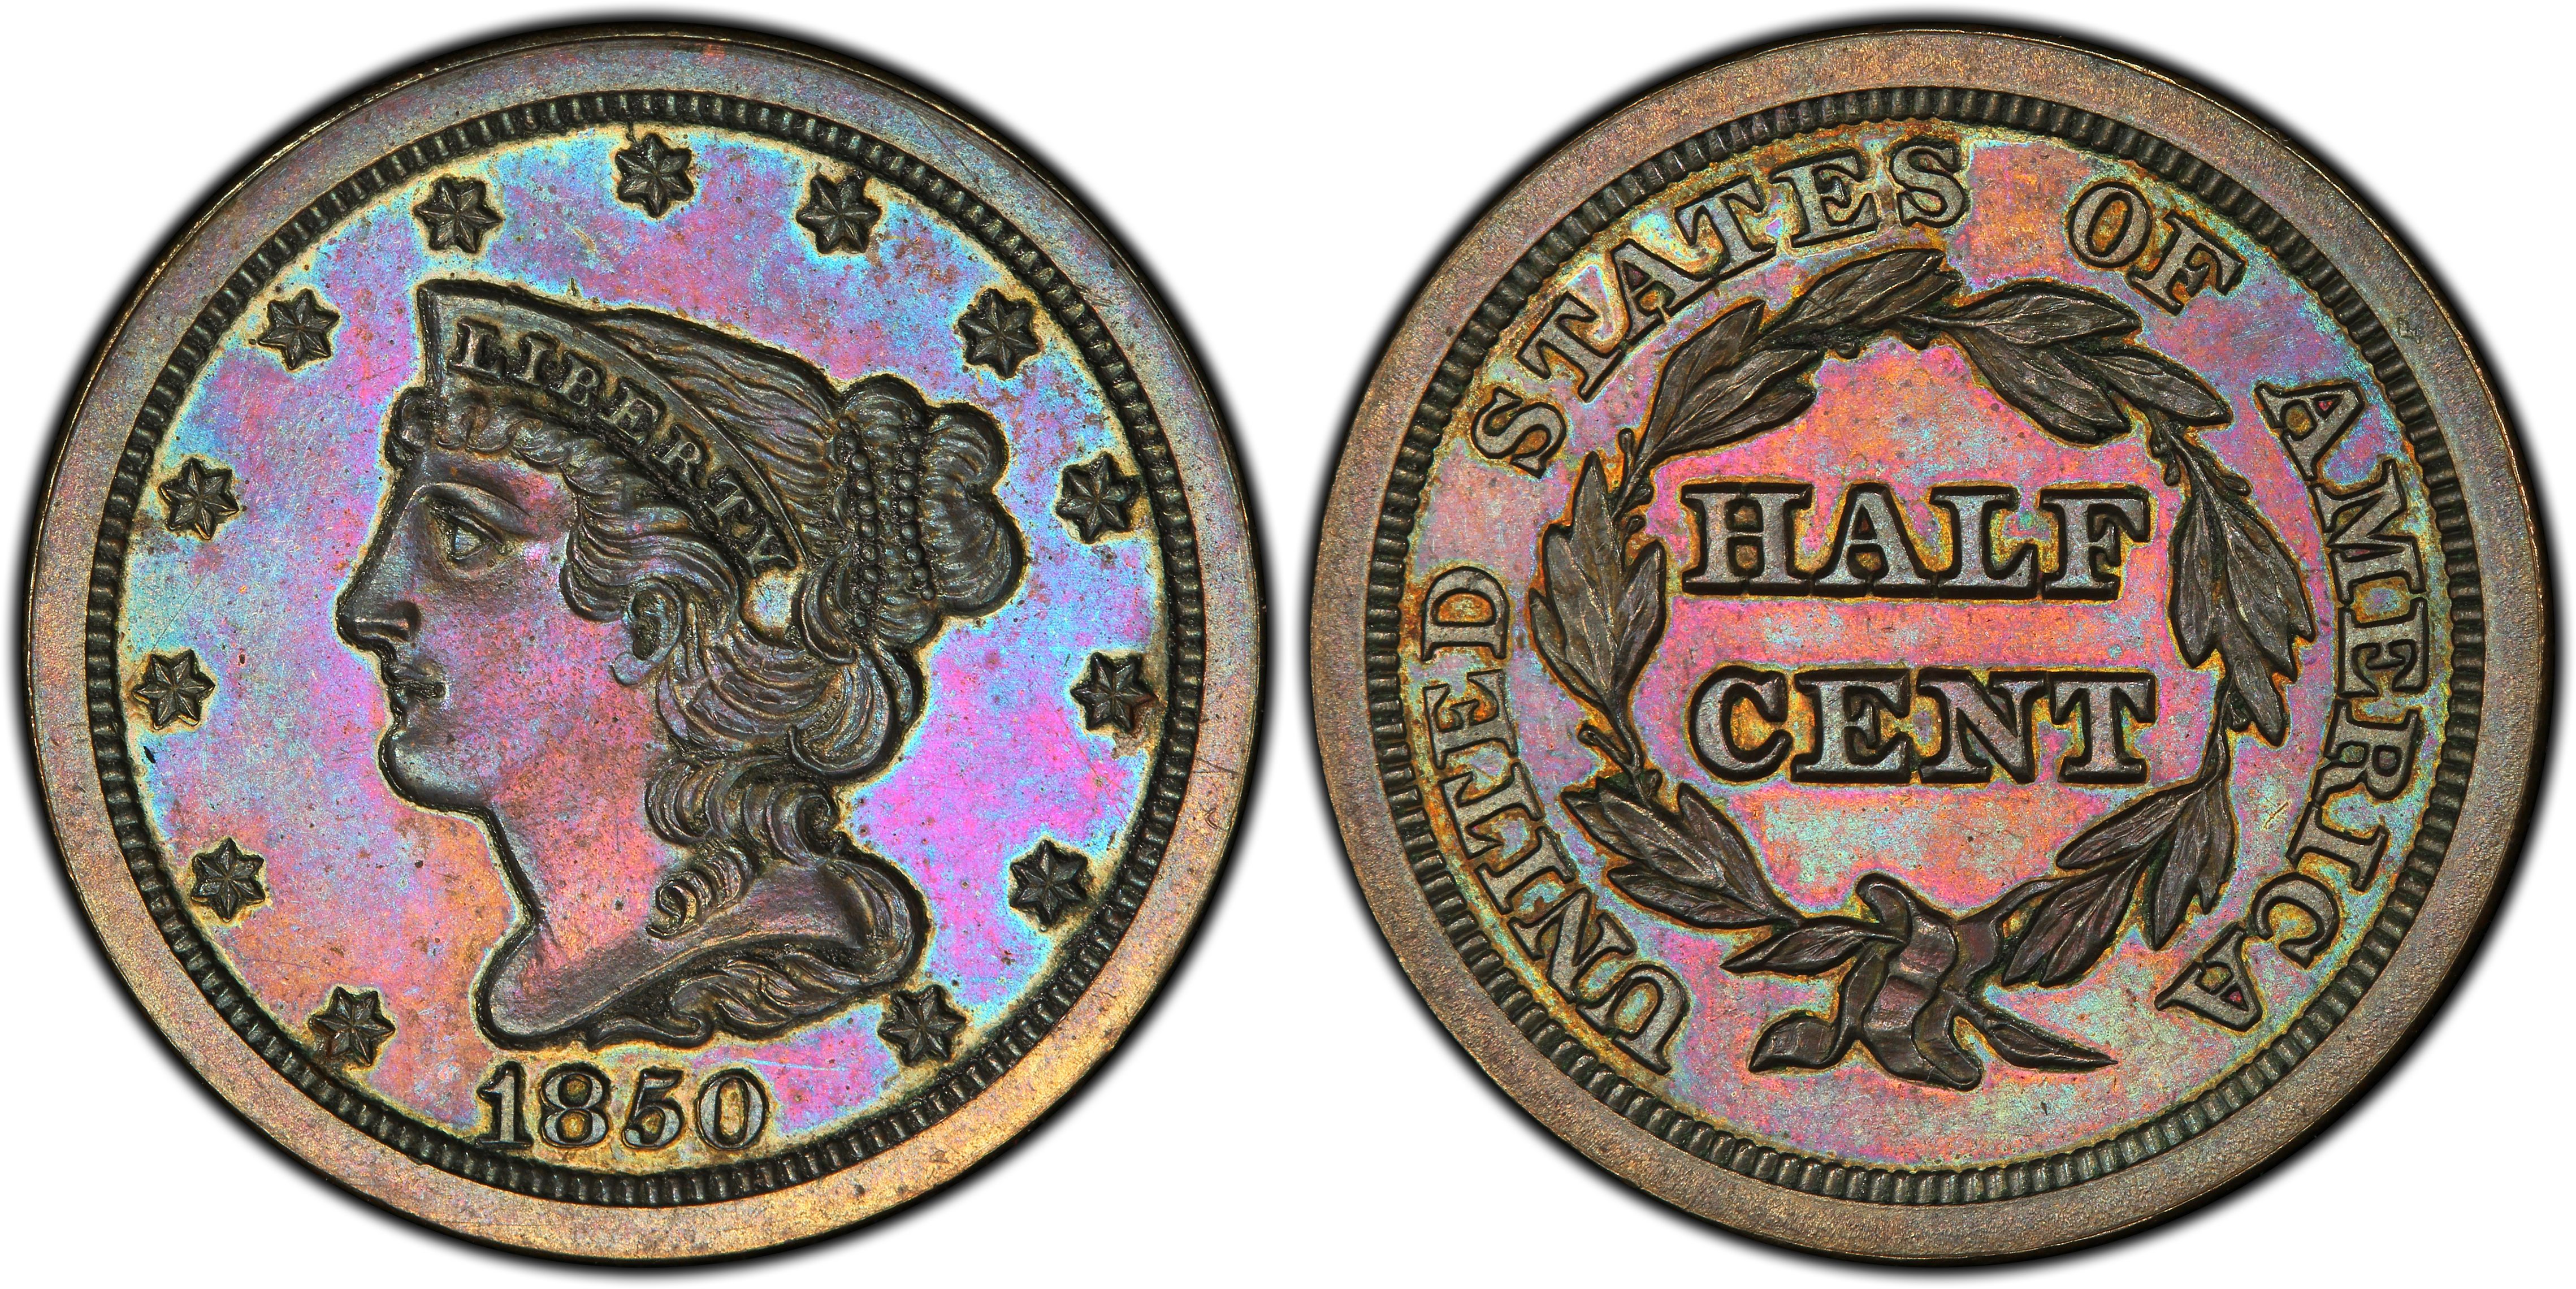 https://images.pcgs.com/CoinFacts/27383258_36719790_2200.jpg